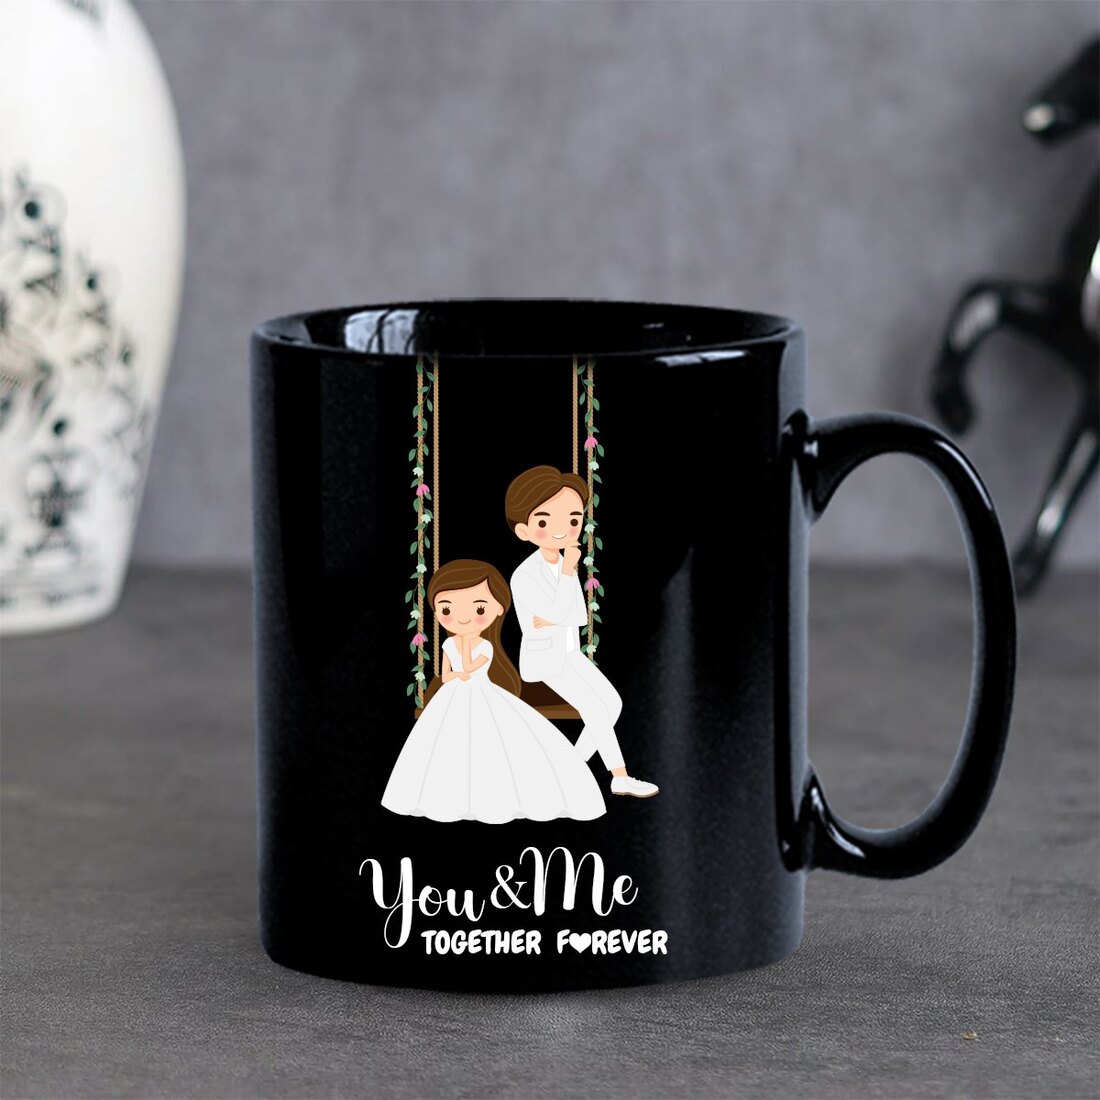 Gorgeous Duo Personalized Mugs - Hello Beautiful, Hello Handsome at Gifts .com